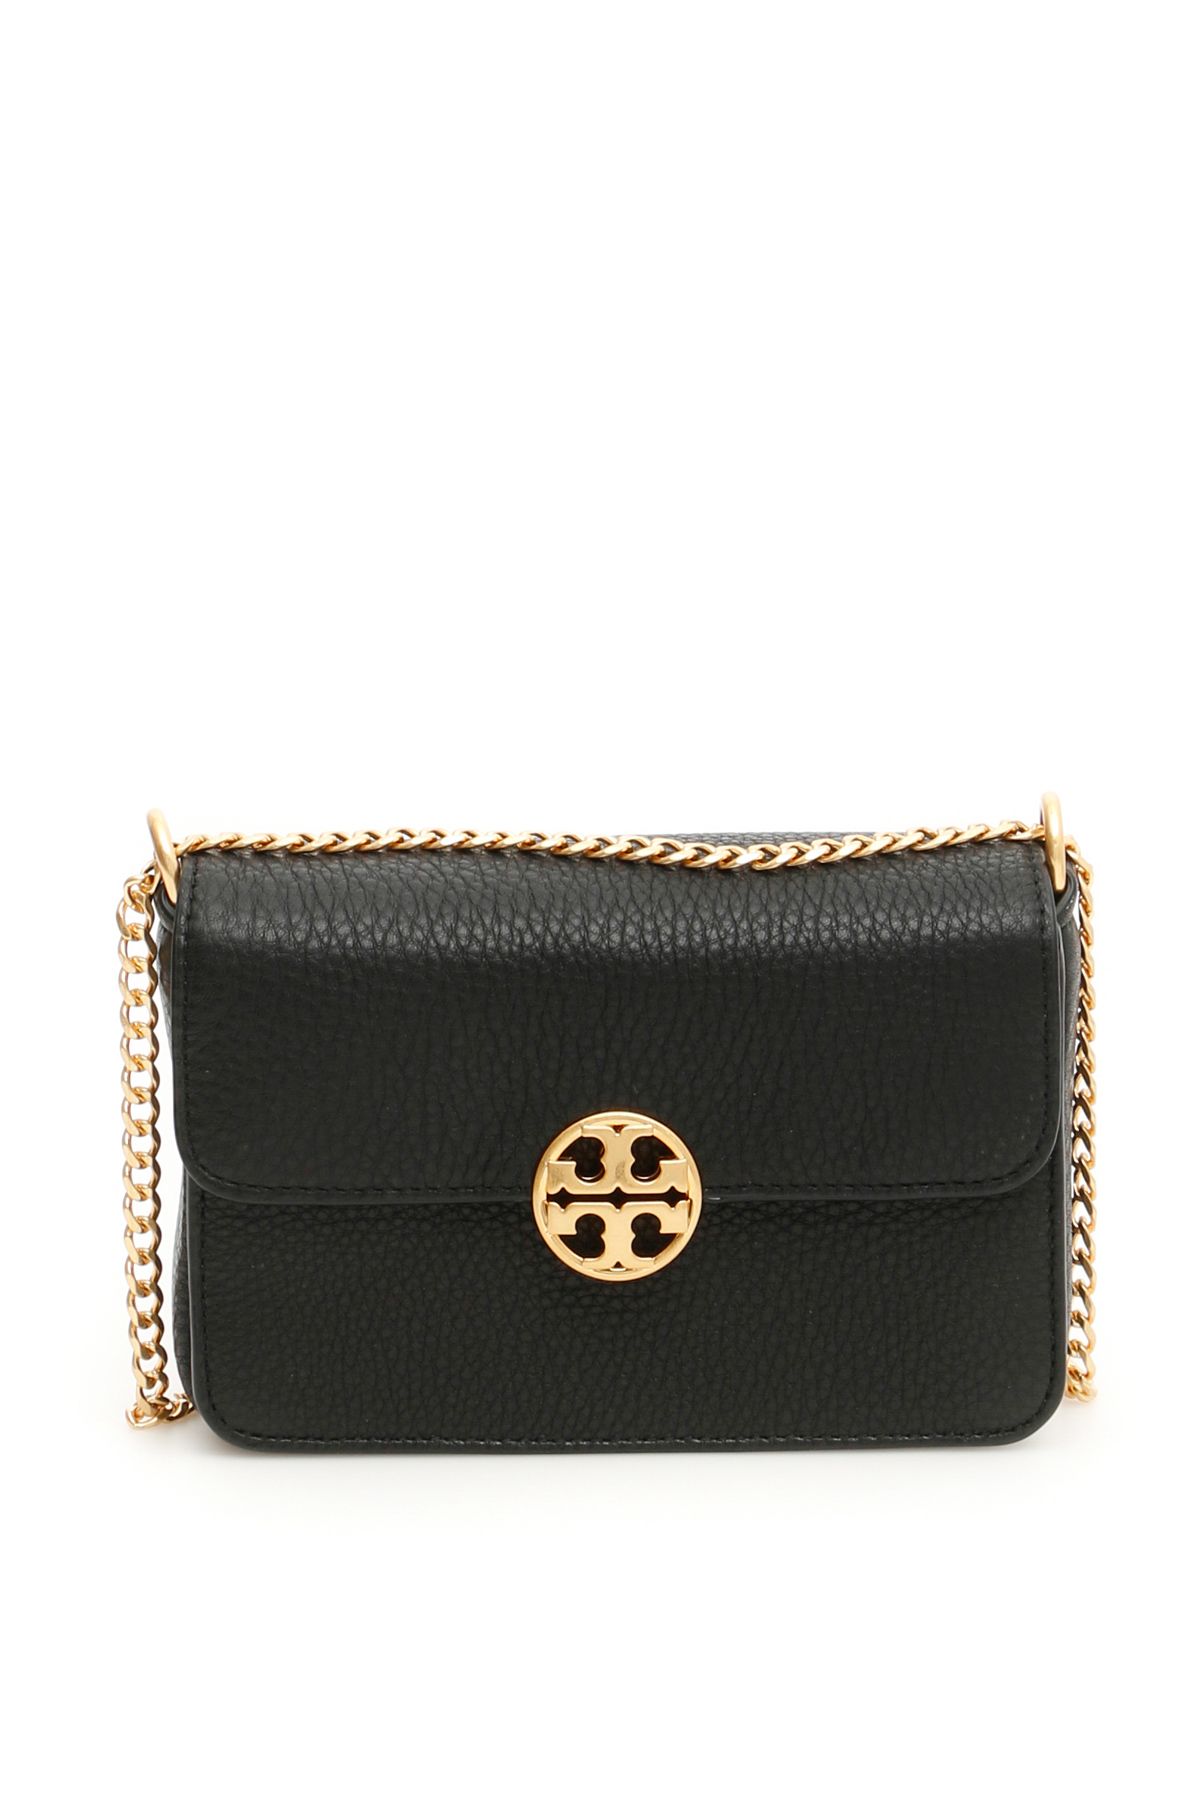 Tory Burch - Chelsea Bag | ABOUT ICONS